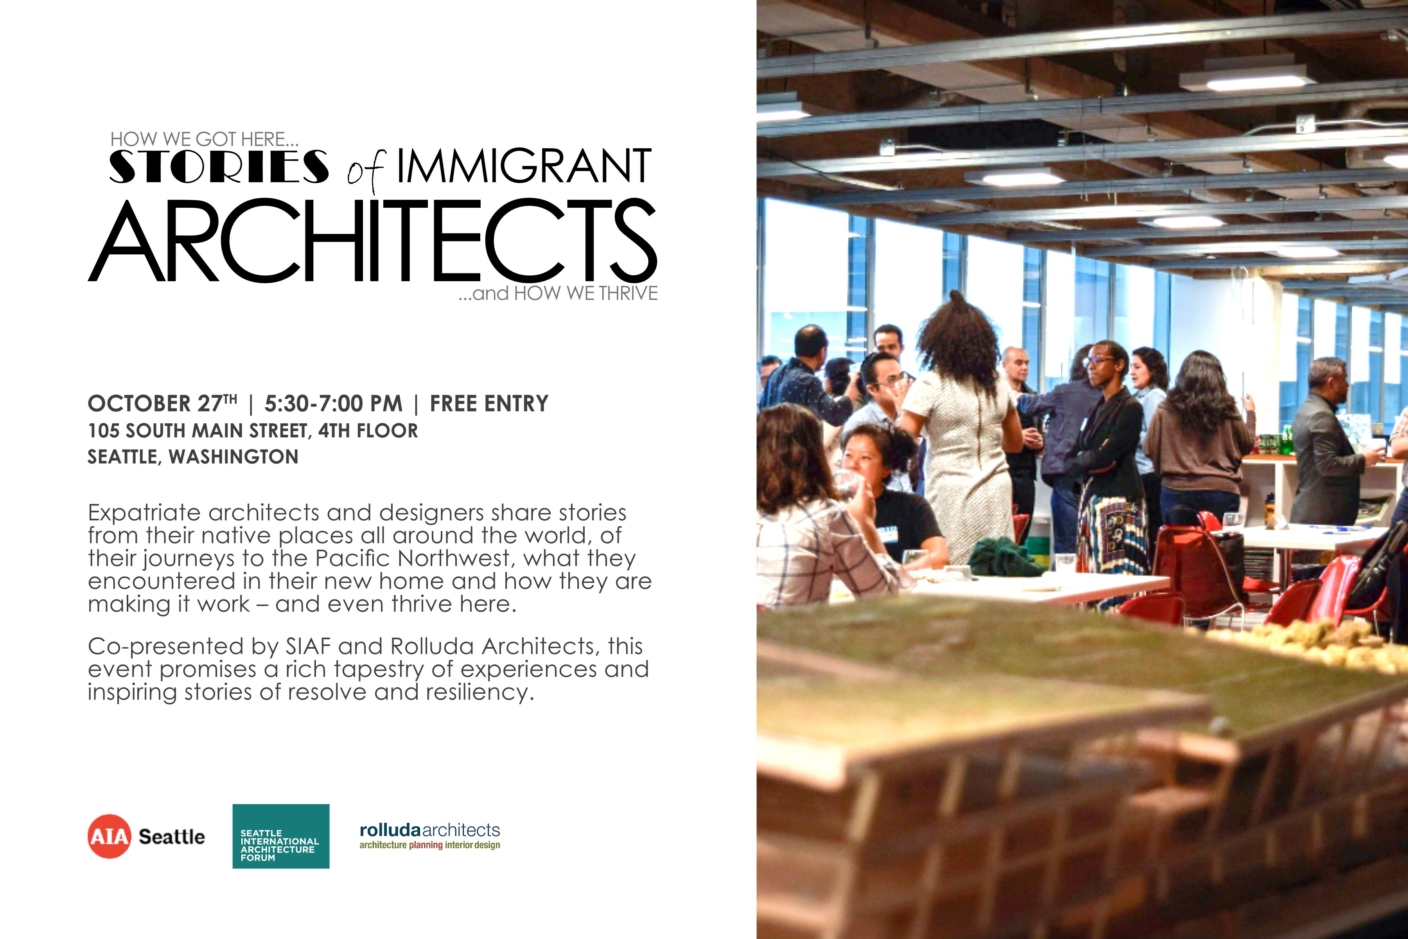 Immigrant architects and designers share stories from their native places all around the world, and their journeys to the Pacific Northwest. Hear what they encountered in their new home, how they are making it work – and how they've even managed to thrive here.